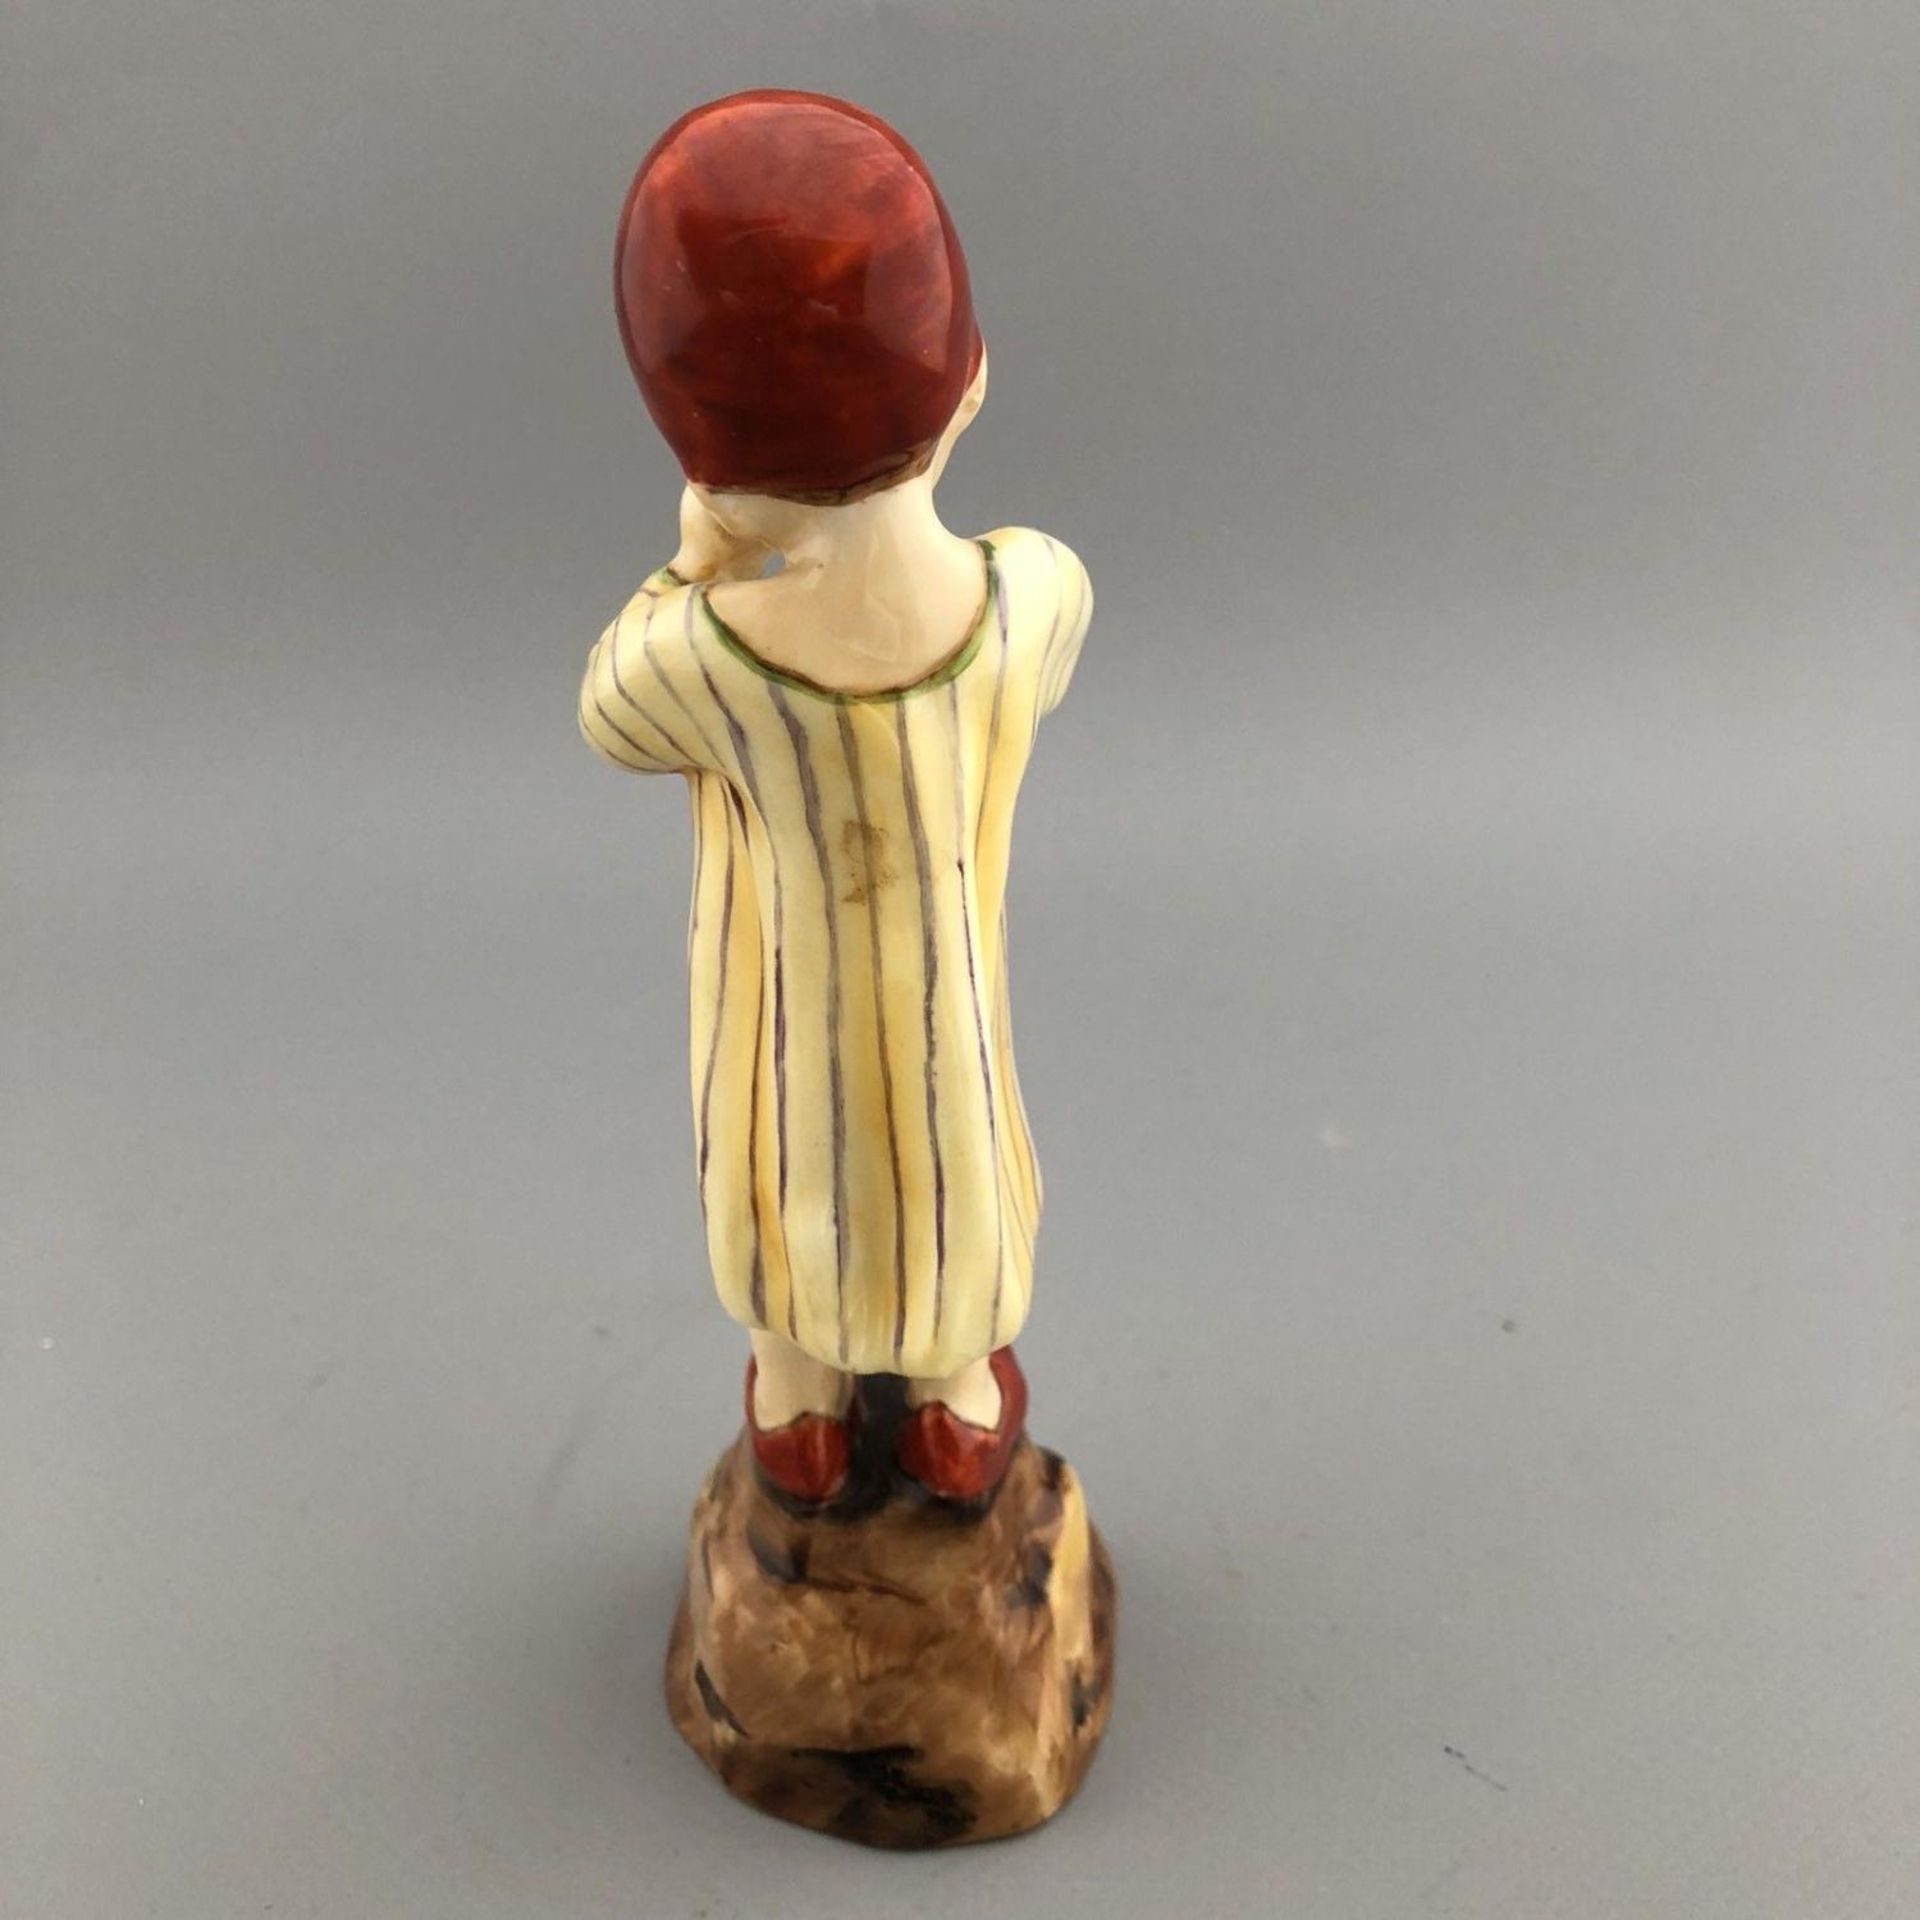 Rare Royal Worcester Porcelain Children of the Nations Figurine EGYPT 3066 - Image 4 of 6